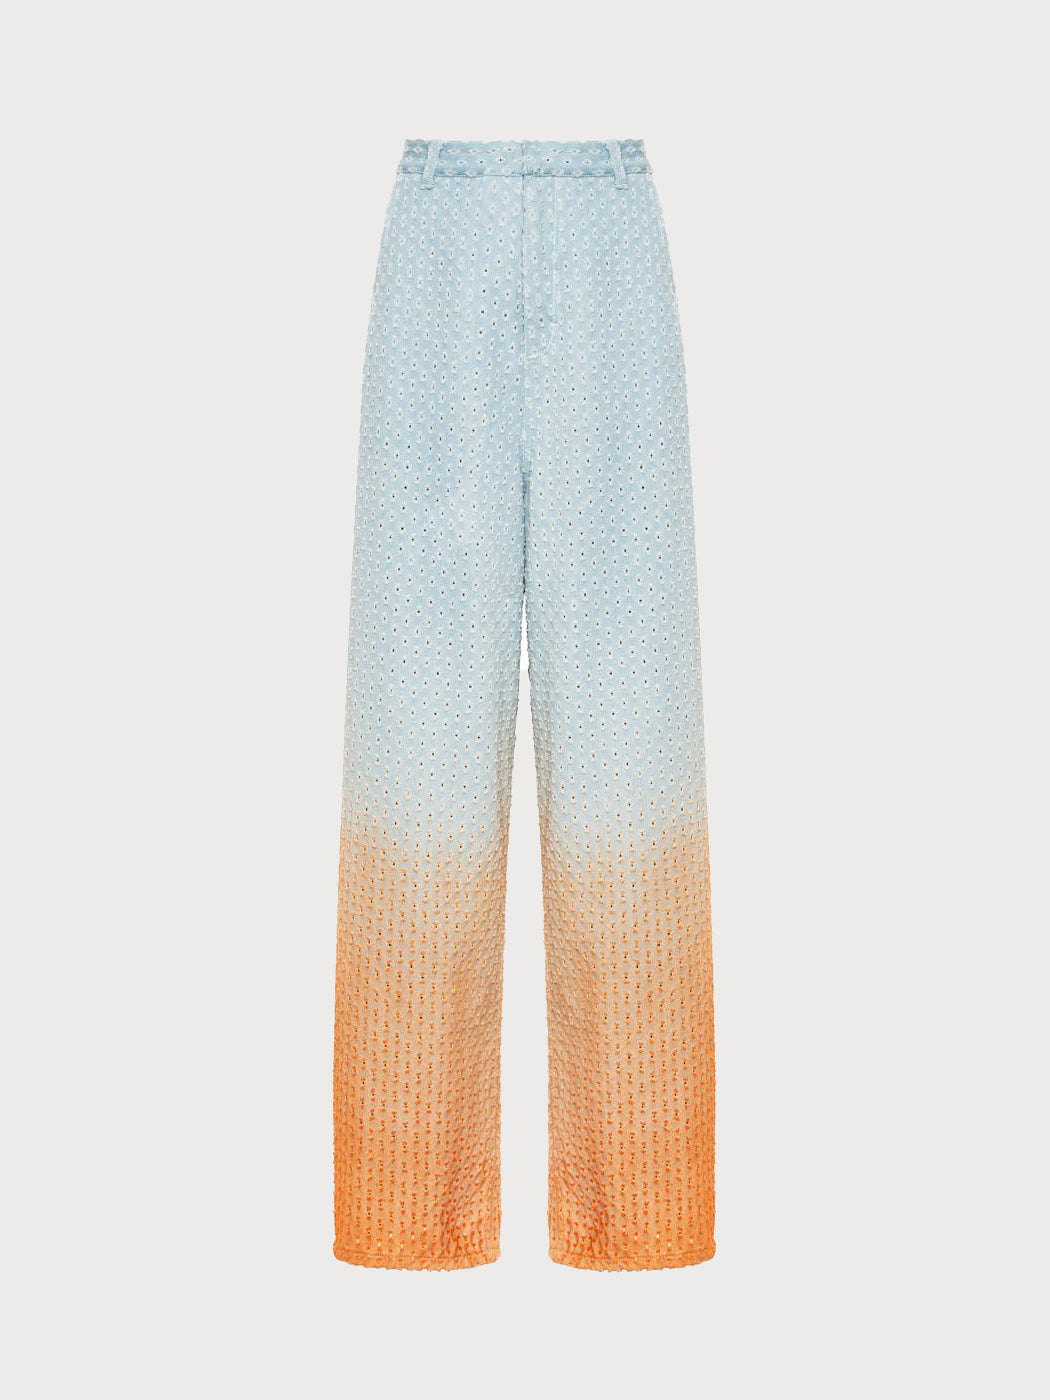 Perforated Jeans with Orange Gradient